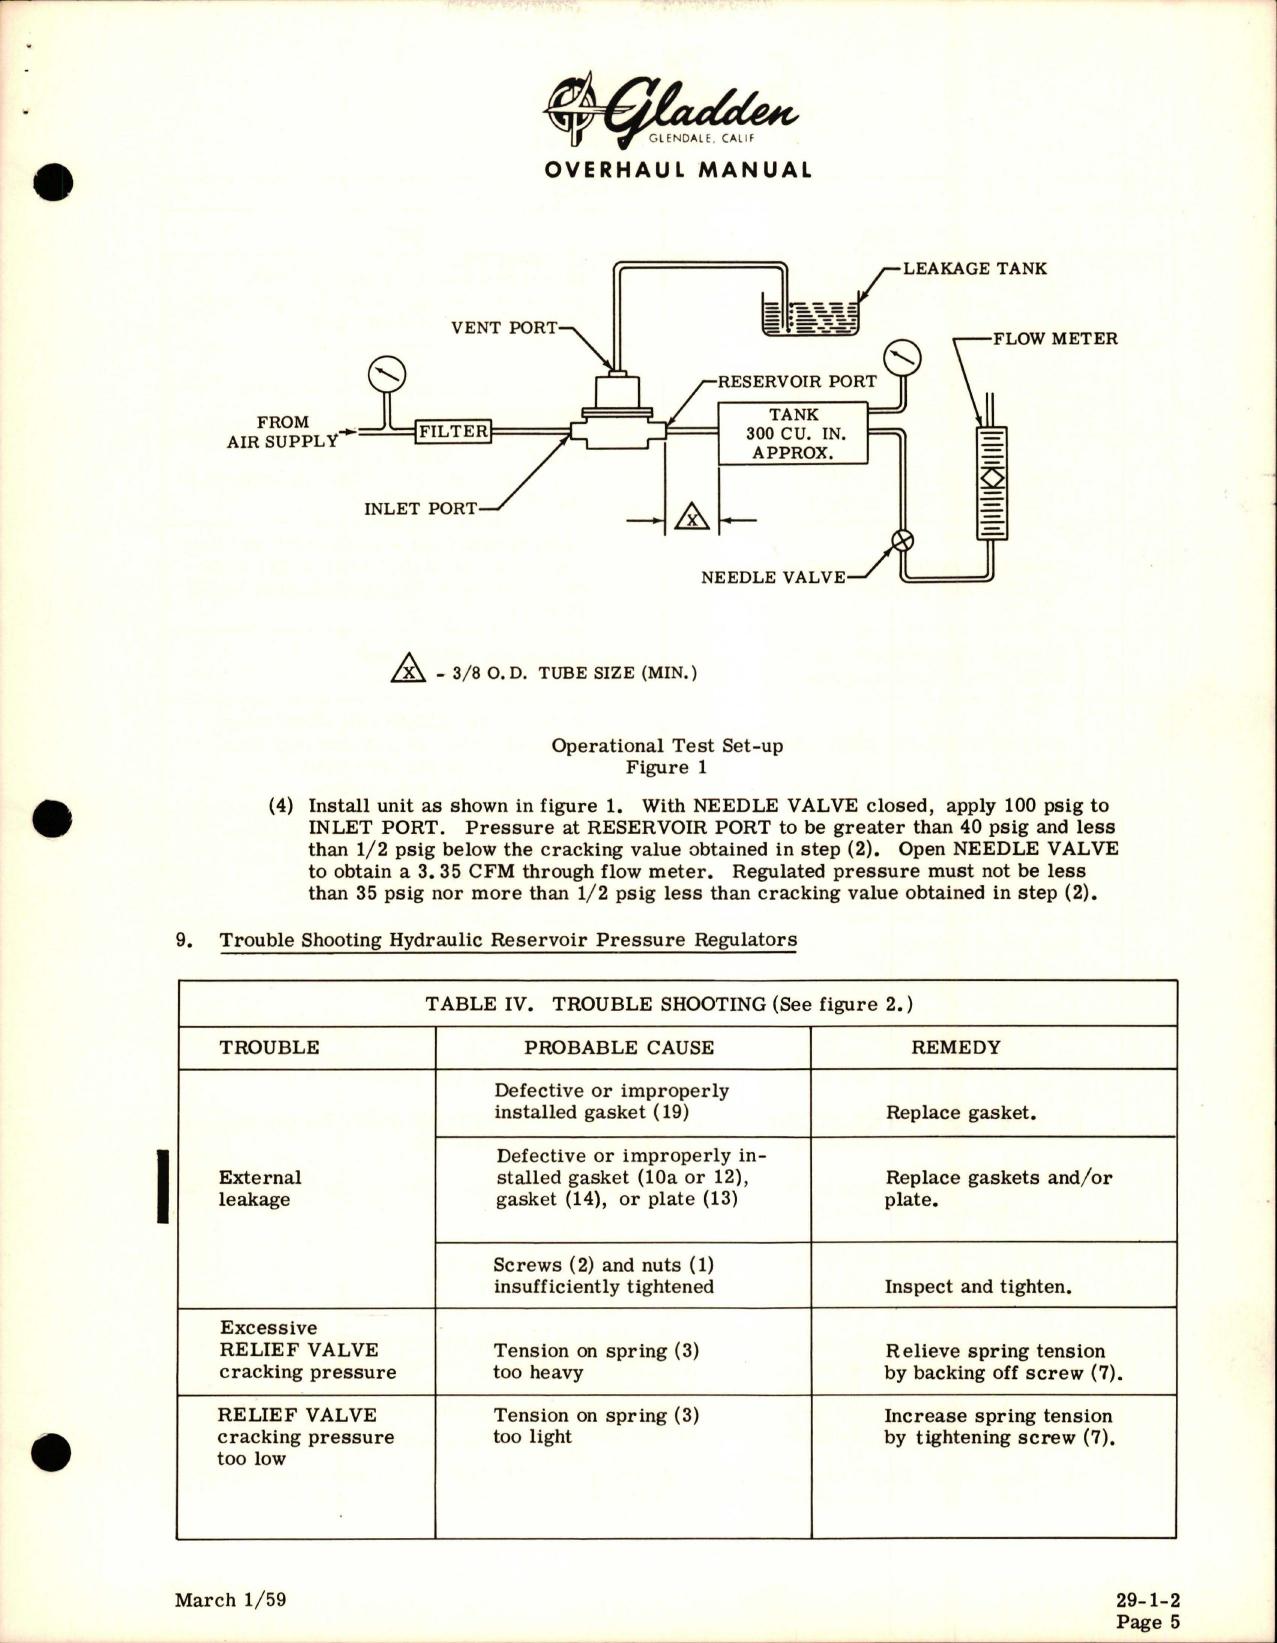 Sample page 5 from AirCorps Library document: Overhaul Manual for Hydraulic Reservoir Pressure Regulators - Parts 314160, 314160-1 and 314160-2